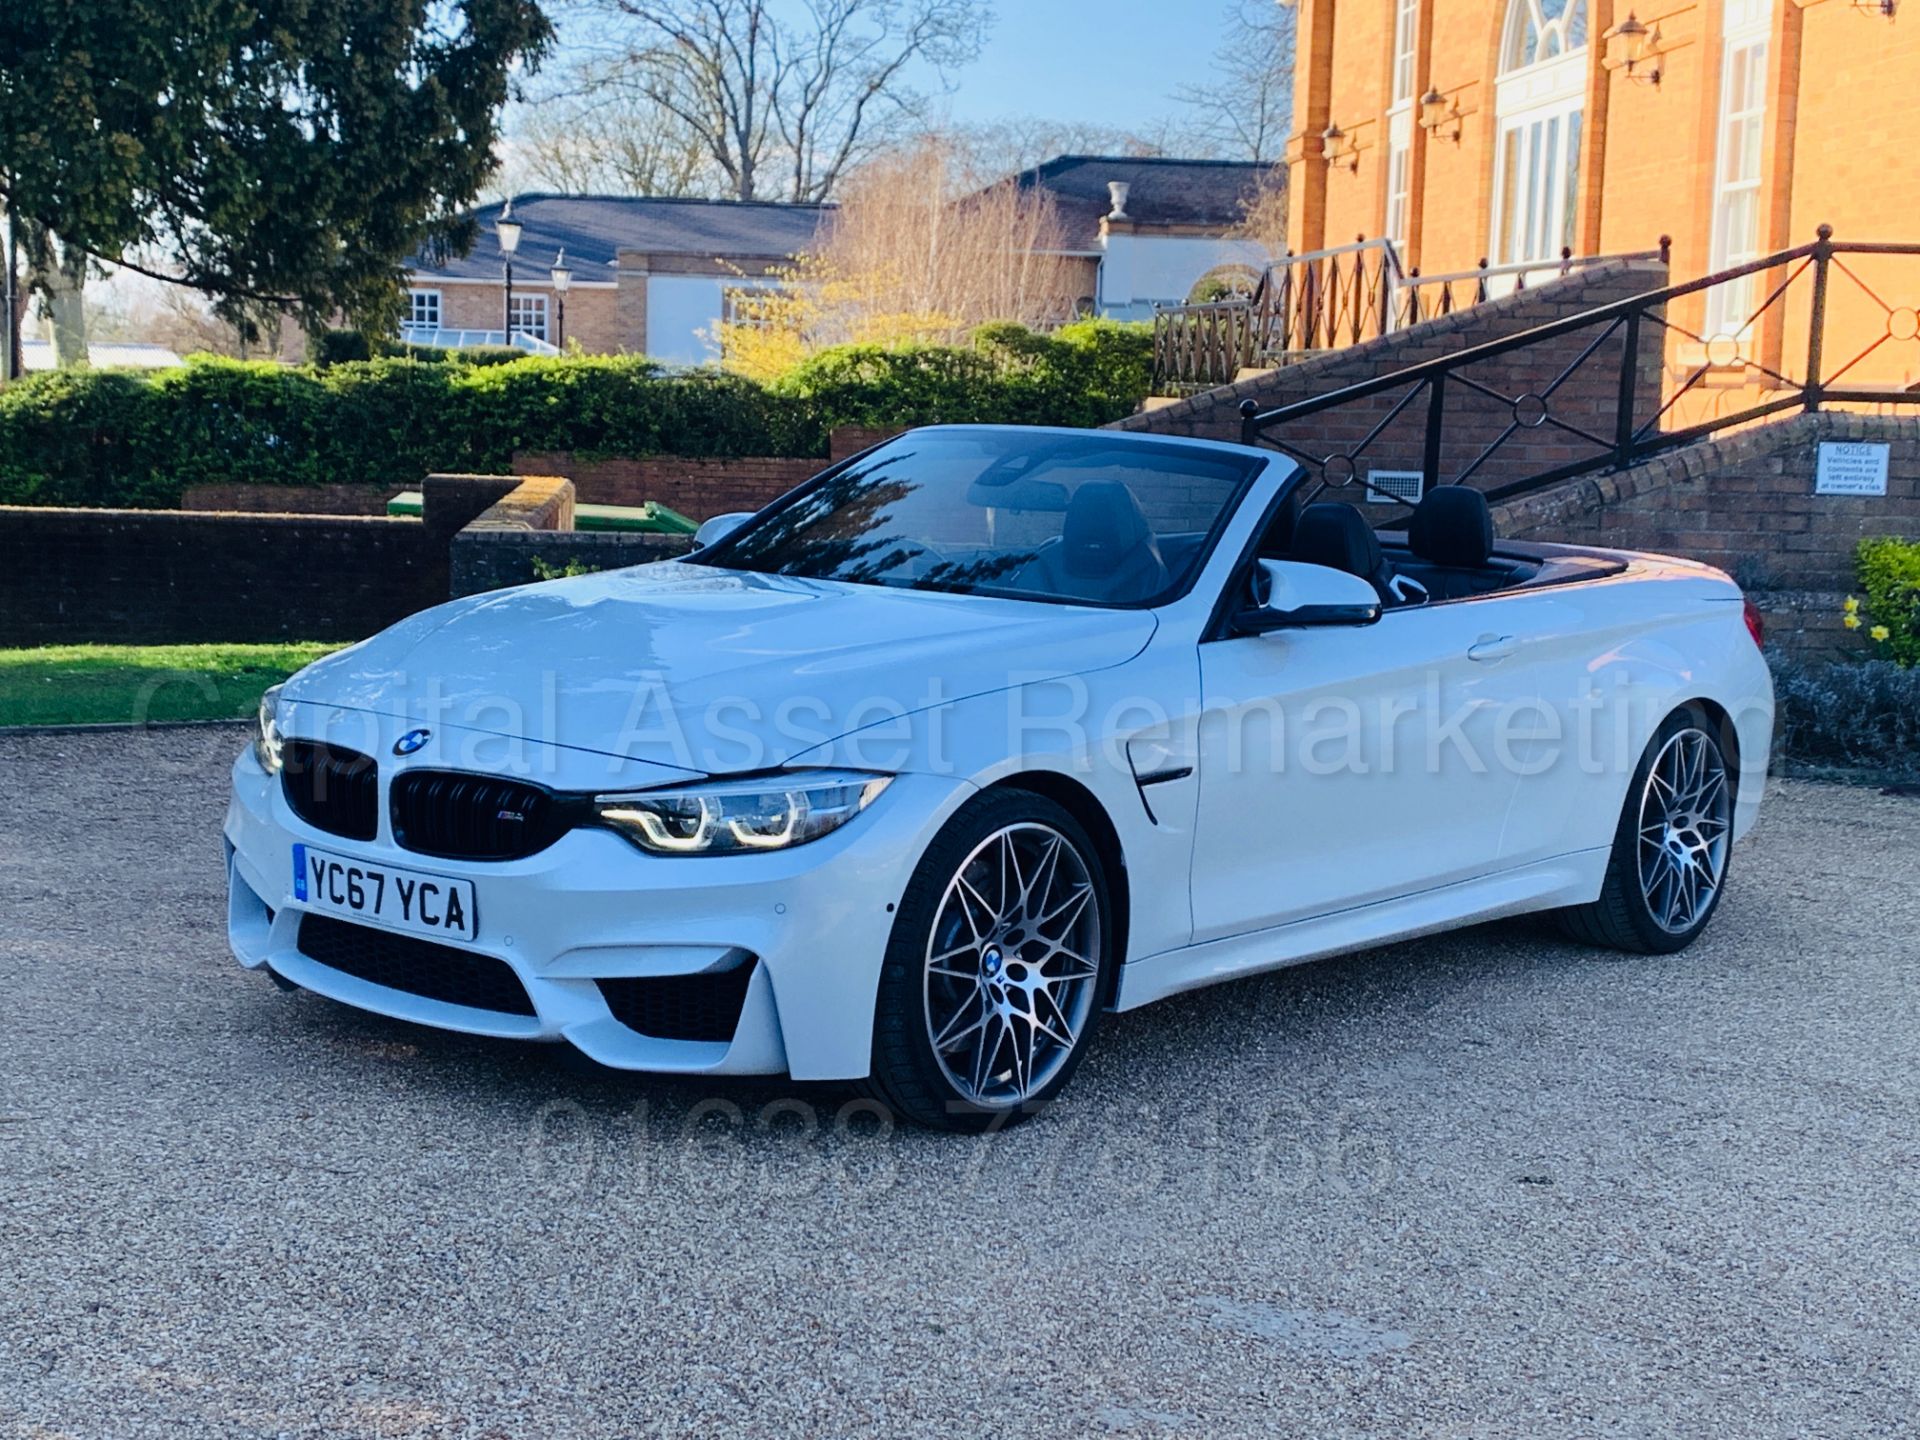 ON SALE BMW M4 CONVERTIBLE *COMPETITION PACKAGE* (2018 MODEL) '431 BHP - M DCT AUTO' WOW!!!!! - Image 5 of 89